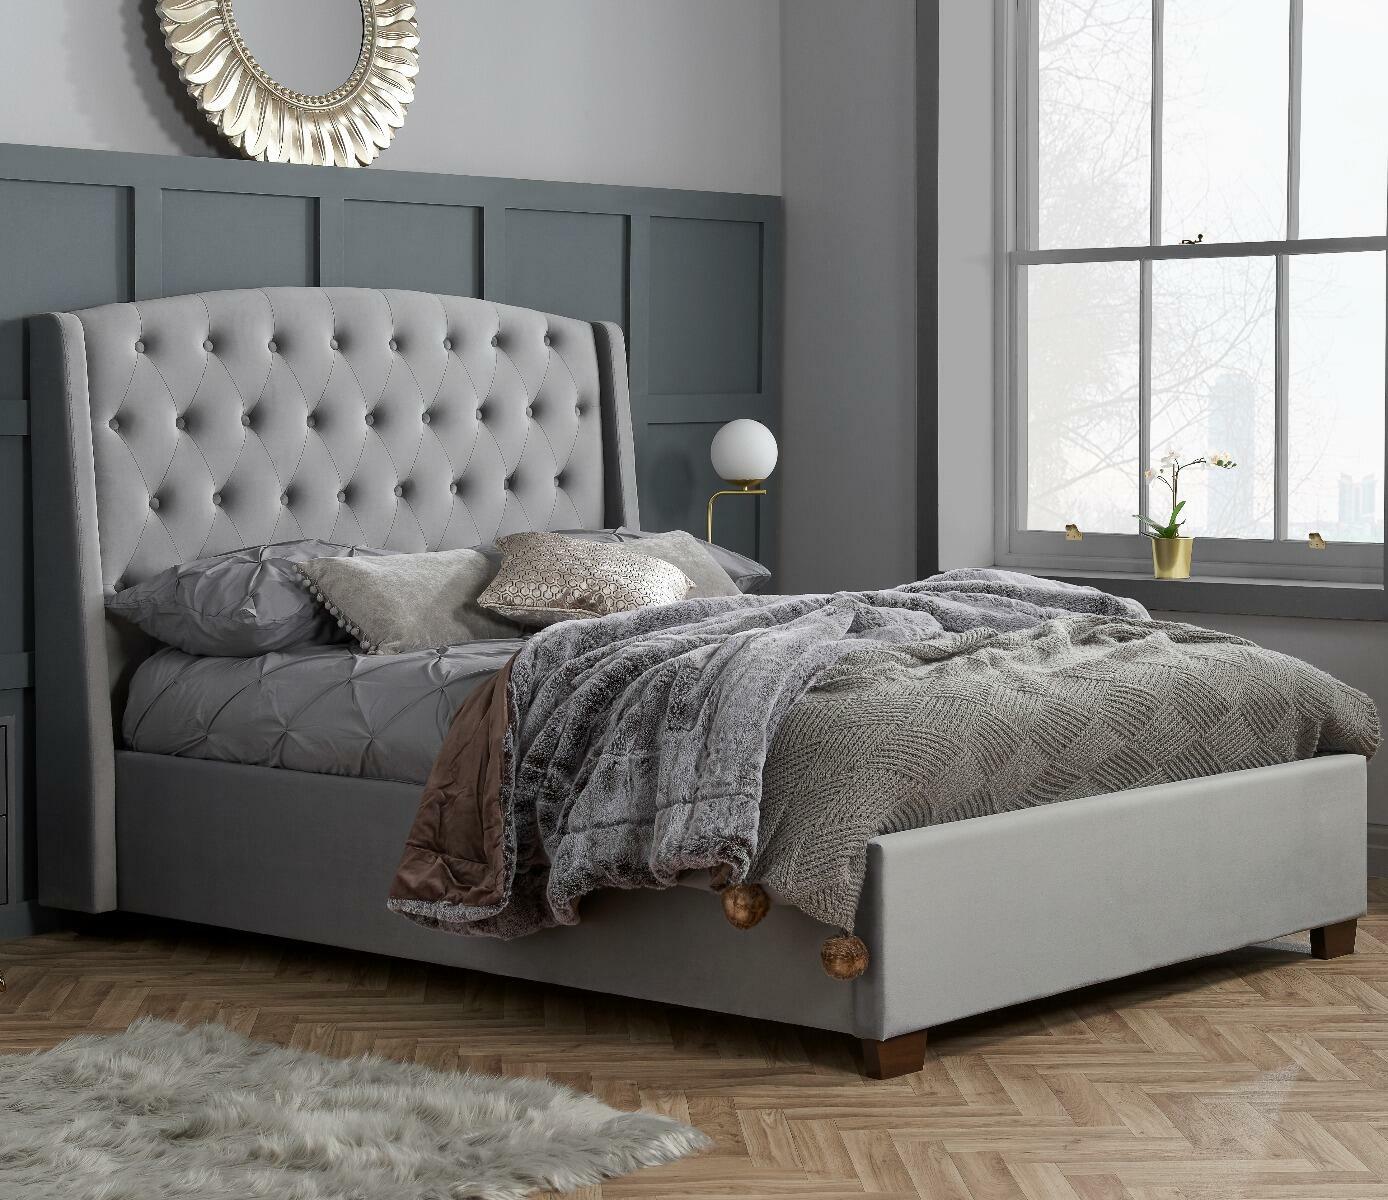 Balm Grey Velvet Fabric Winged Bed, King Fabric Headboard Beds